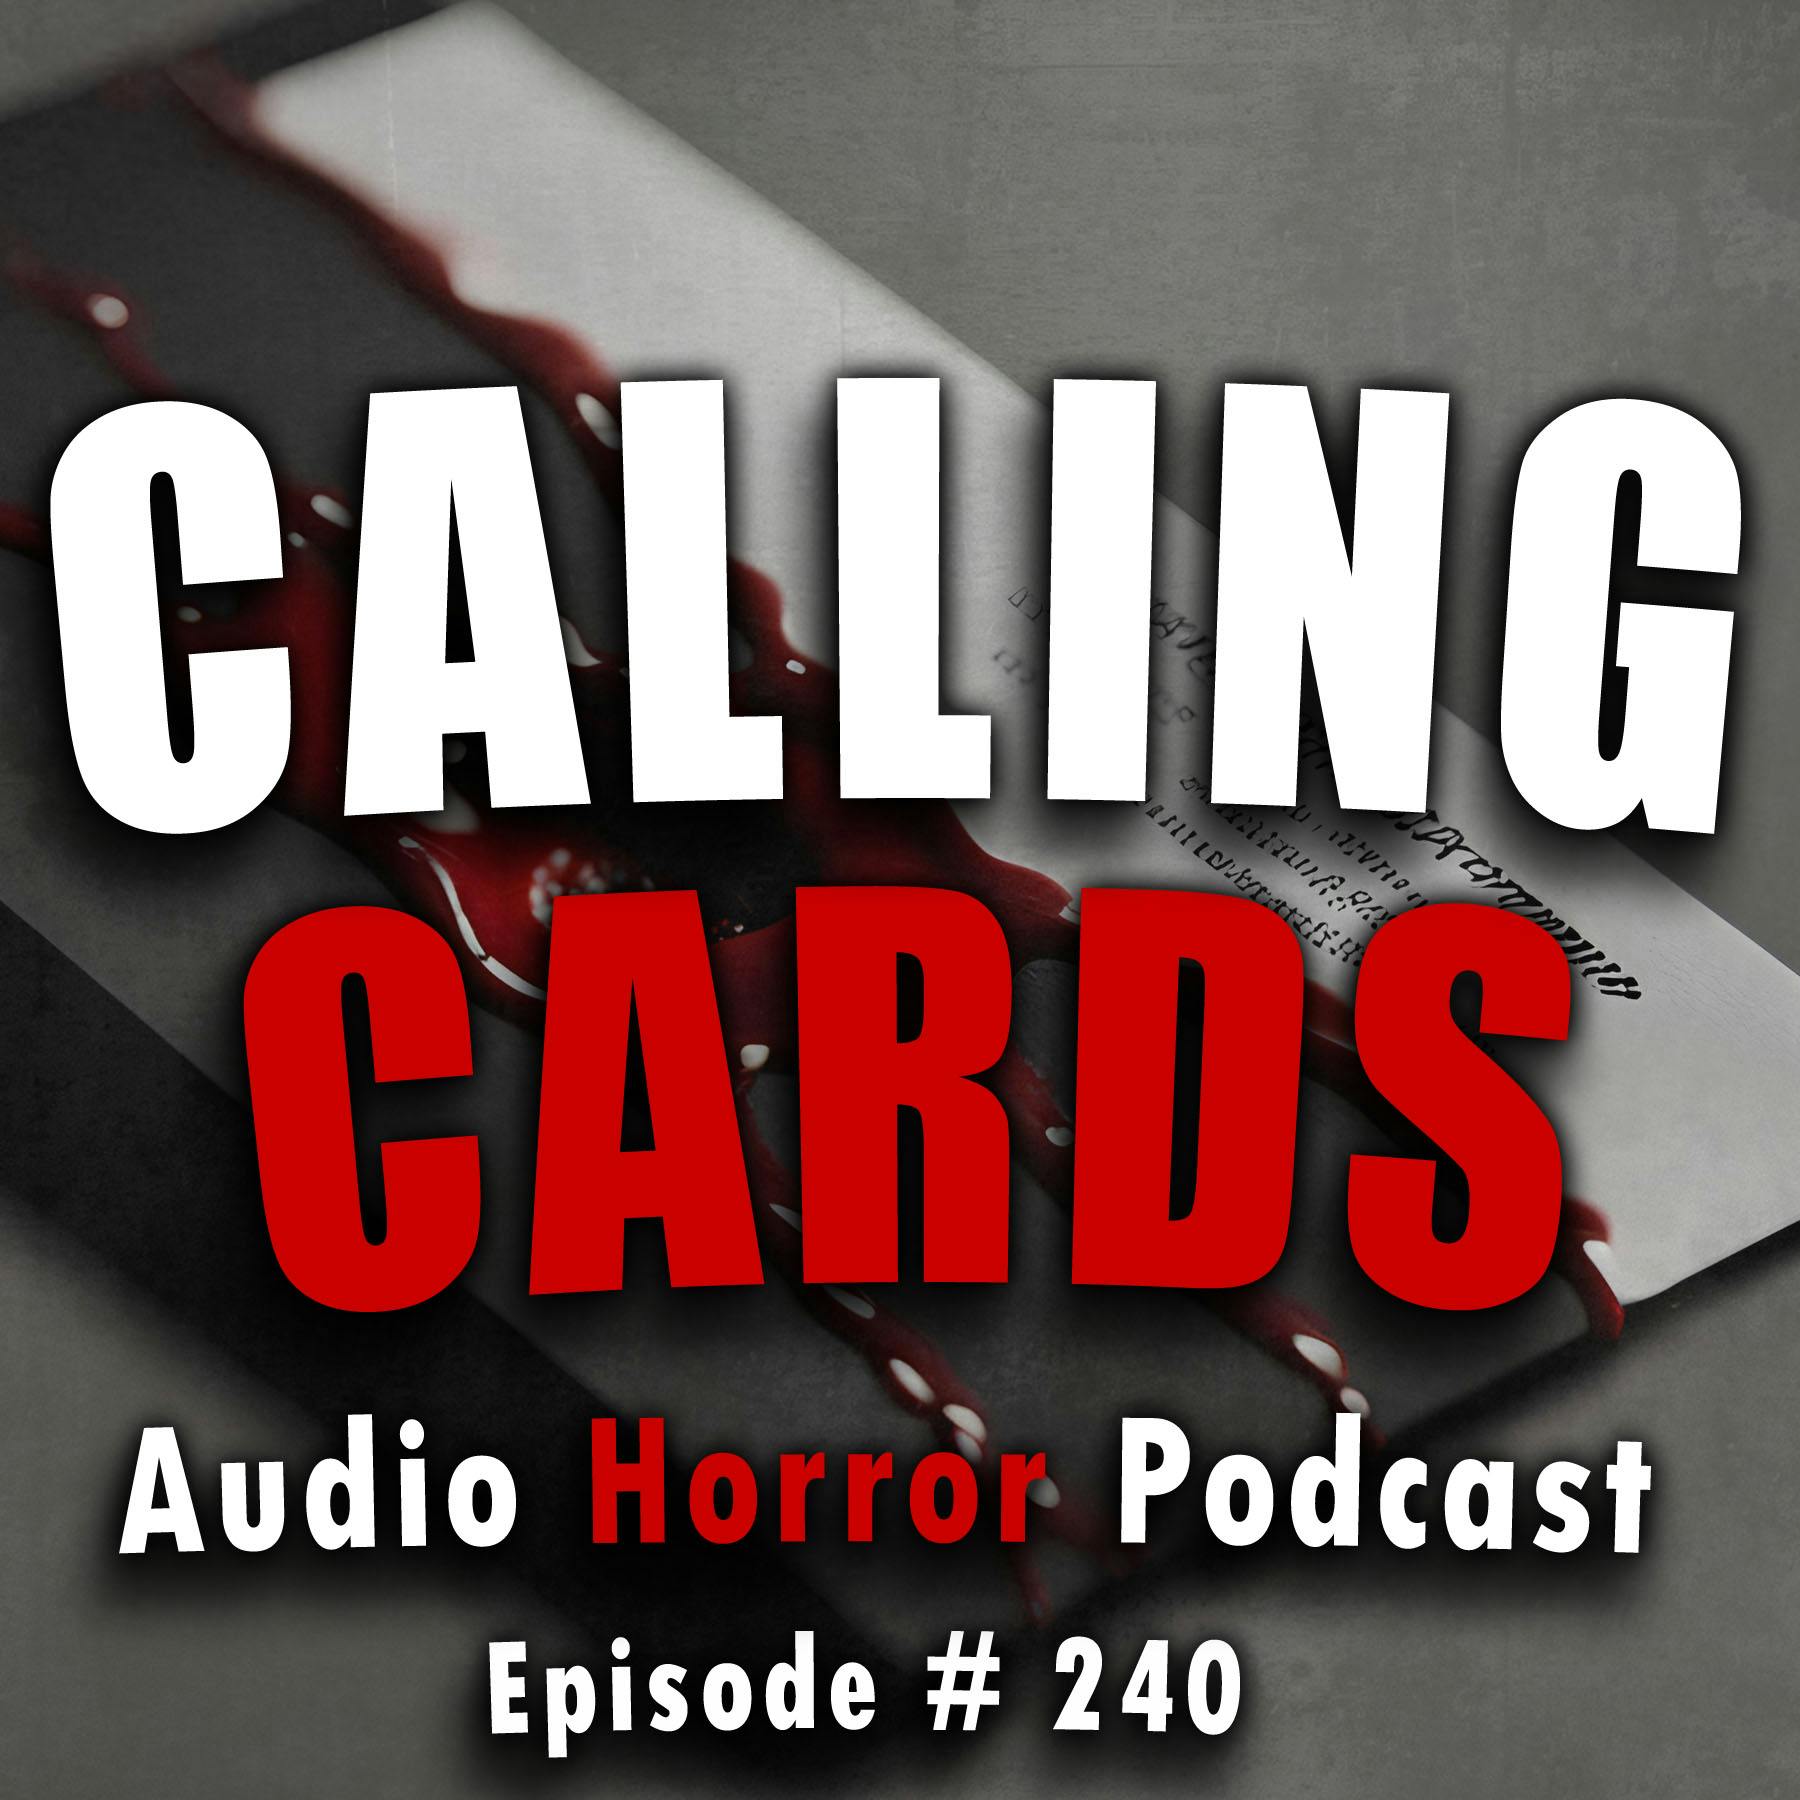 240: Calling Cards  - Chilling Tales for Dark Night